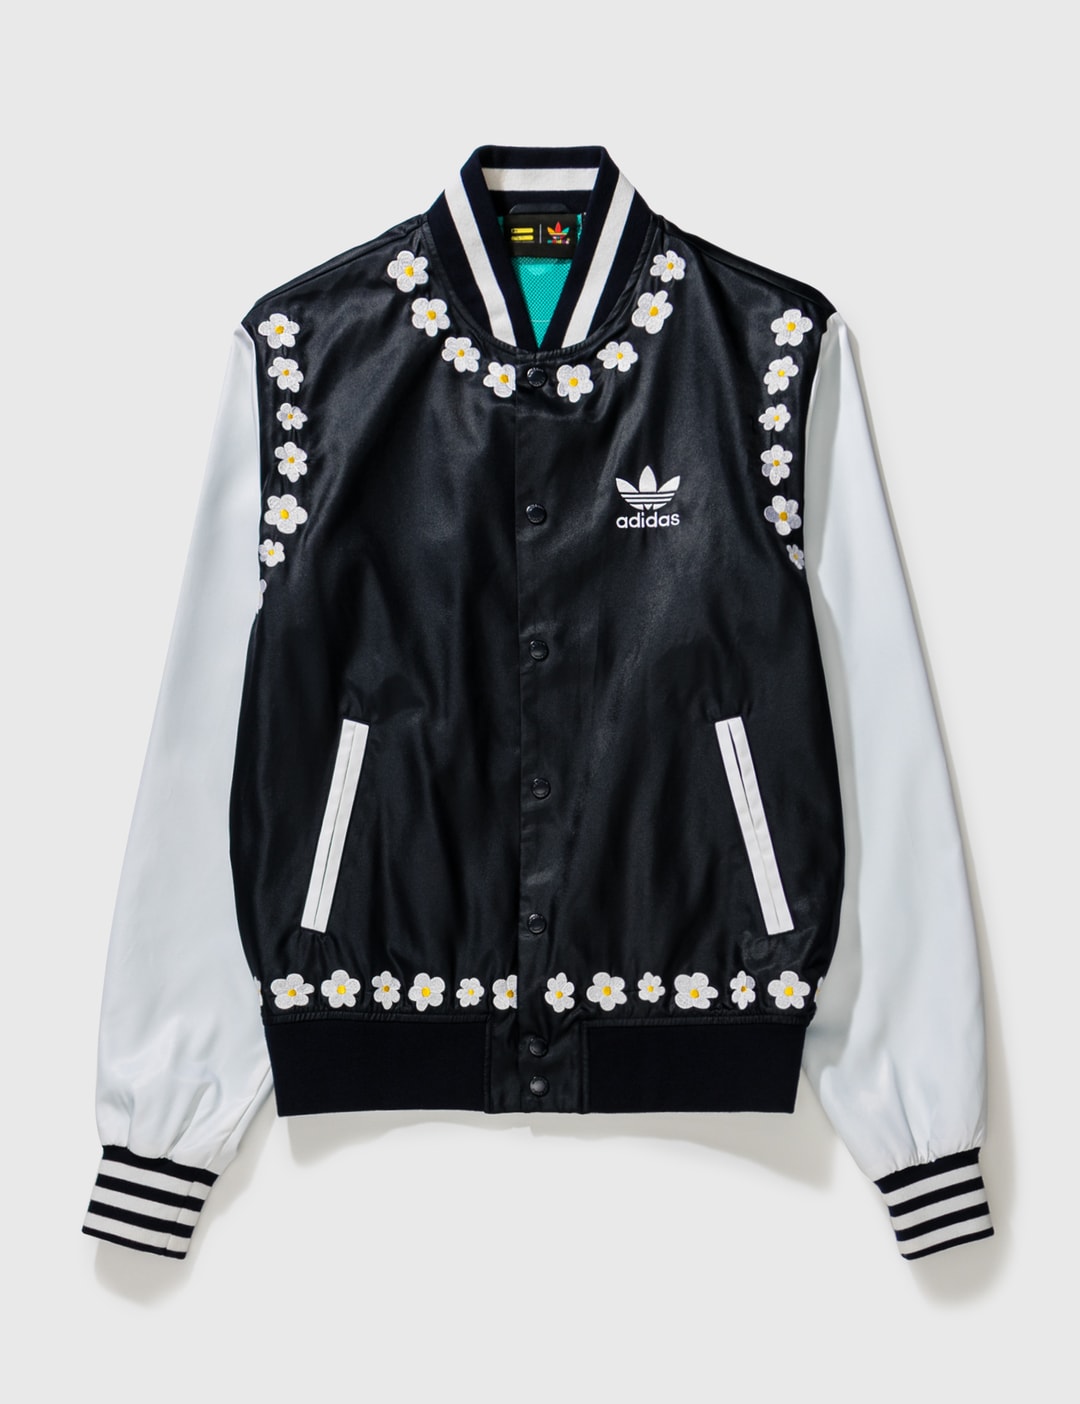 Originals - X PHARRELL WILLIAMS JACKET | HBX - Globally Curated and Lifestyle by Hypebeast